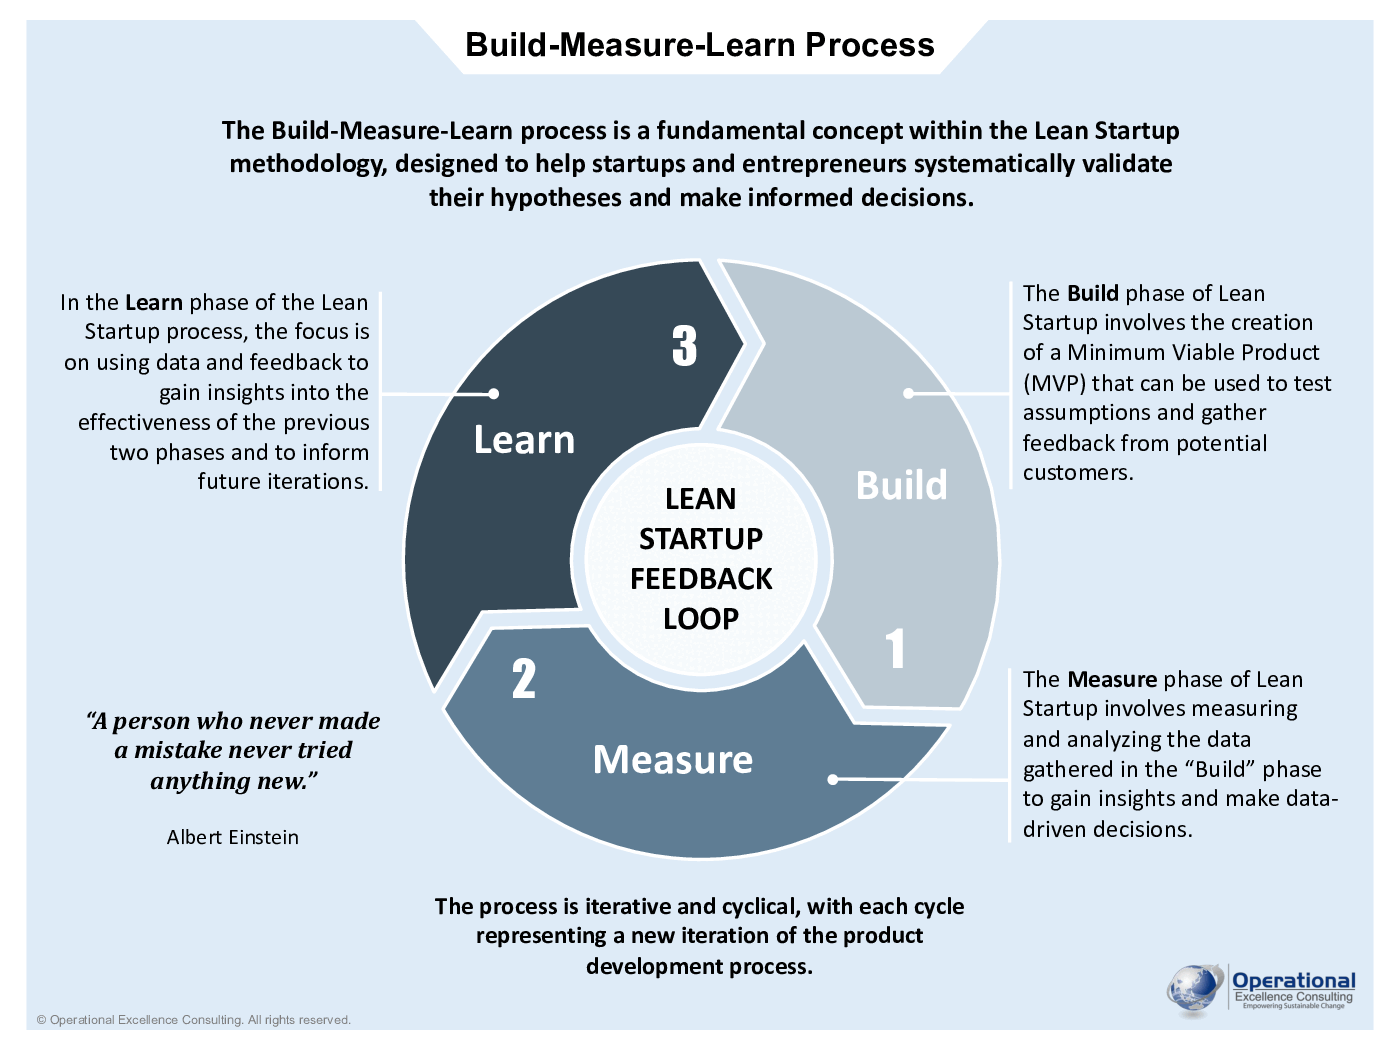 Build-Measure-Learn Process Poster